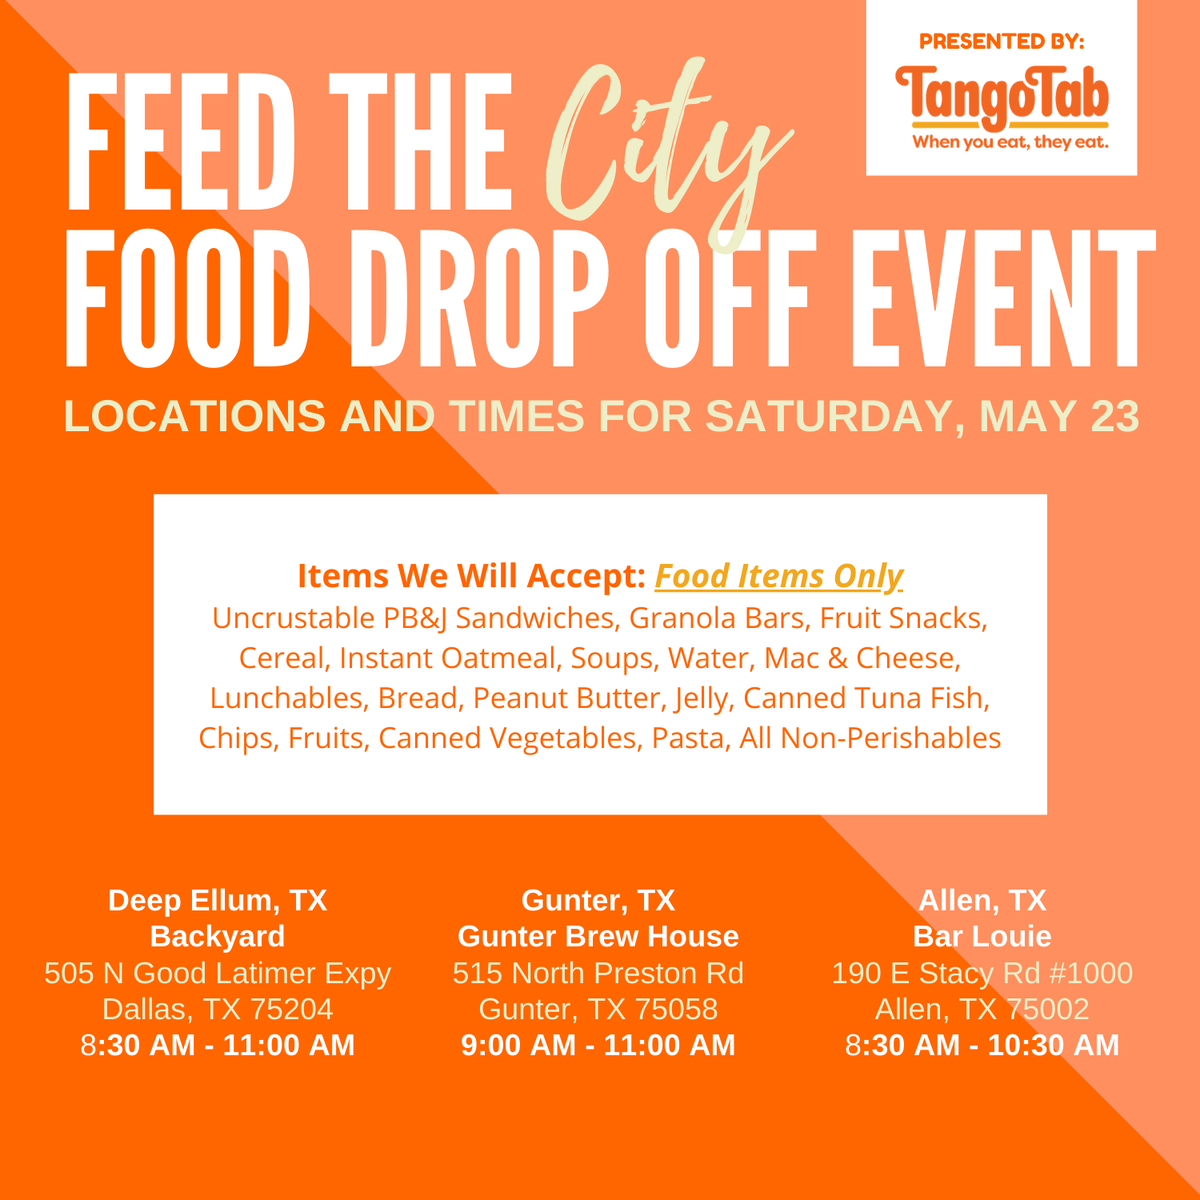 Not only is Feed The City back this weekend, but we are also hosting THREE drop off events.